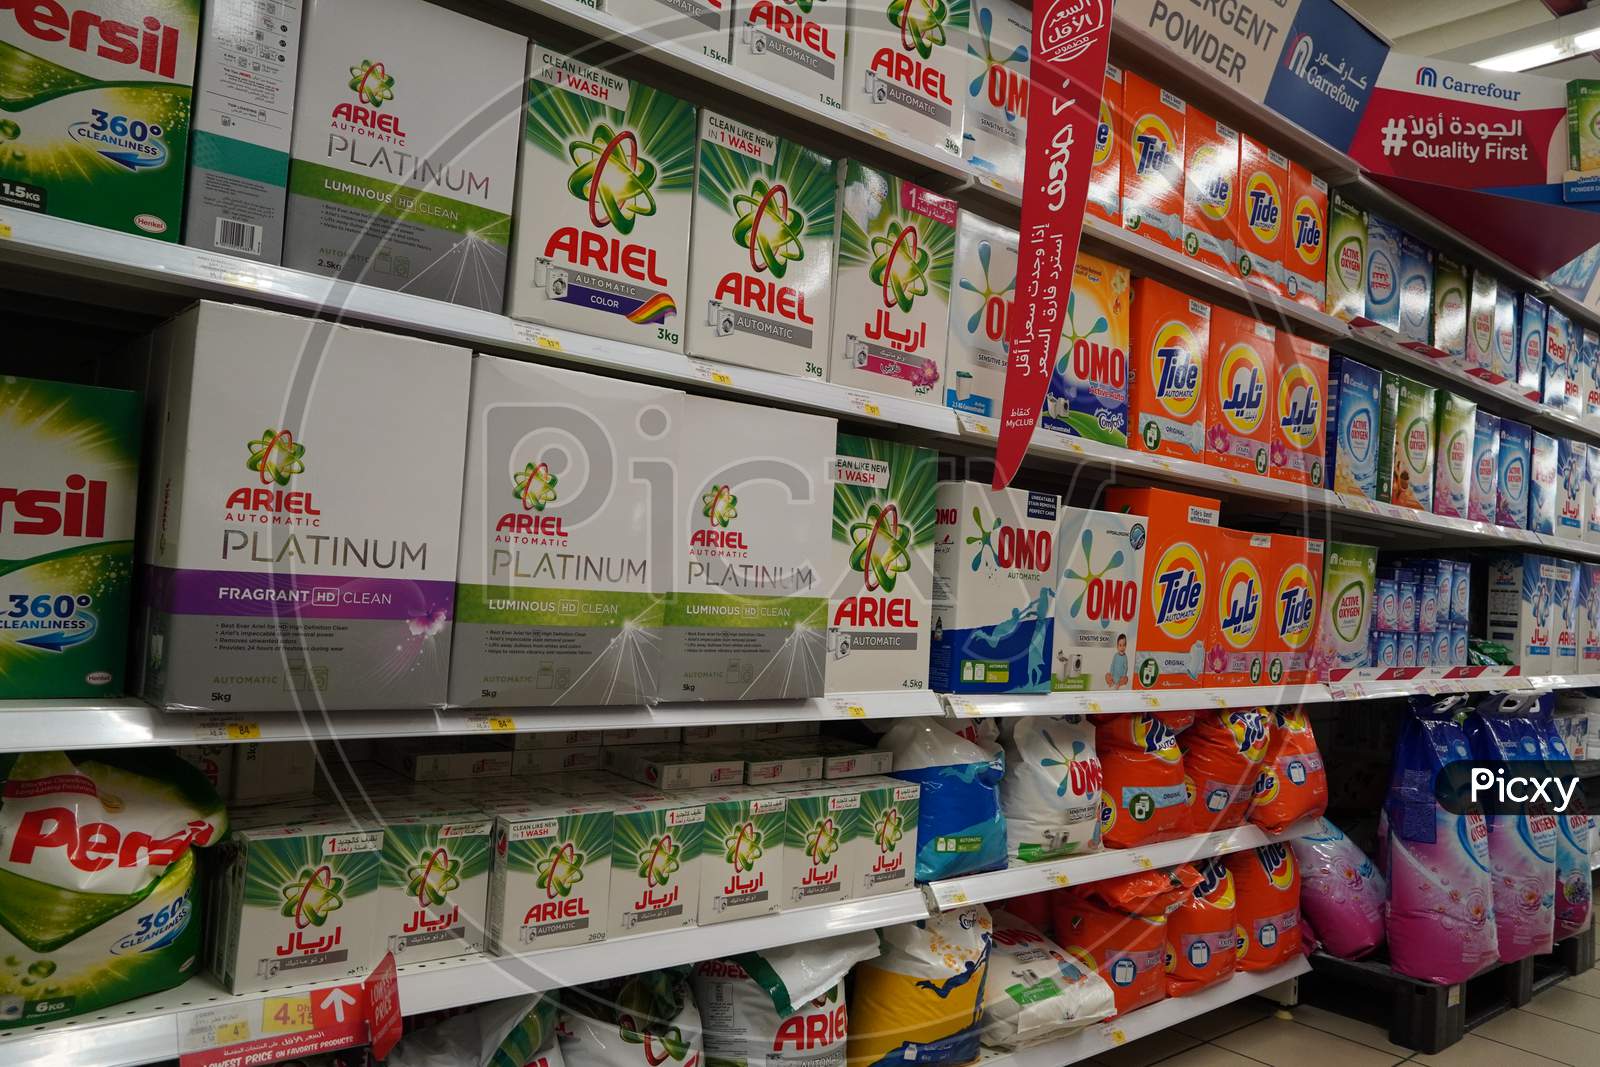 Supermarket Display With Different Brands Of Washing Powder In Boxes. Wholesale. Tide, Ariel, Omo Laundry Detergent Boxes Lined Up For Sale In A Store Shelf- Dubai Uae December 2019